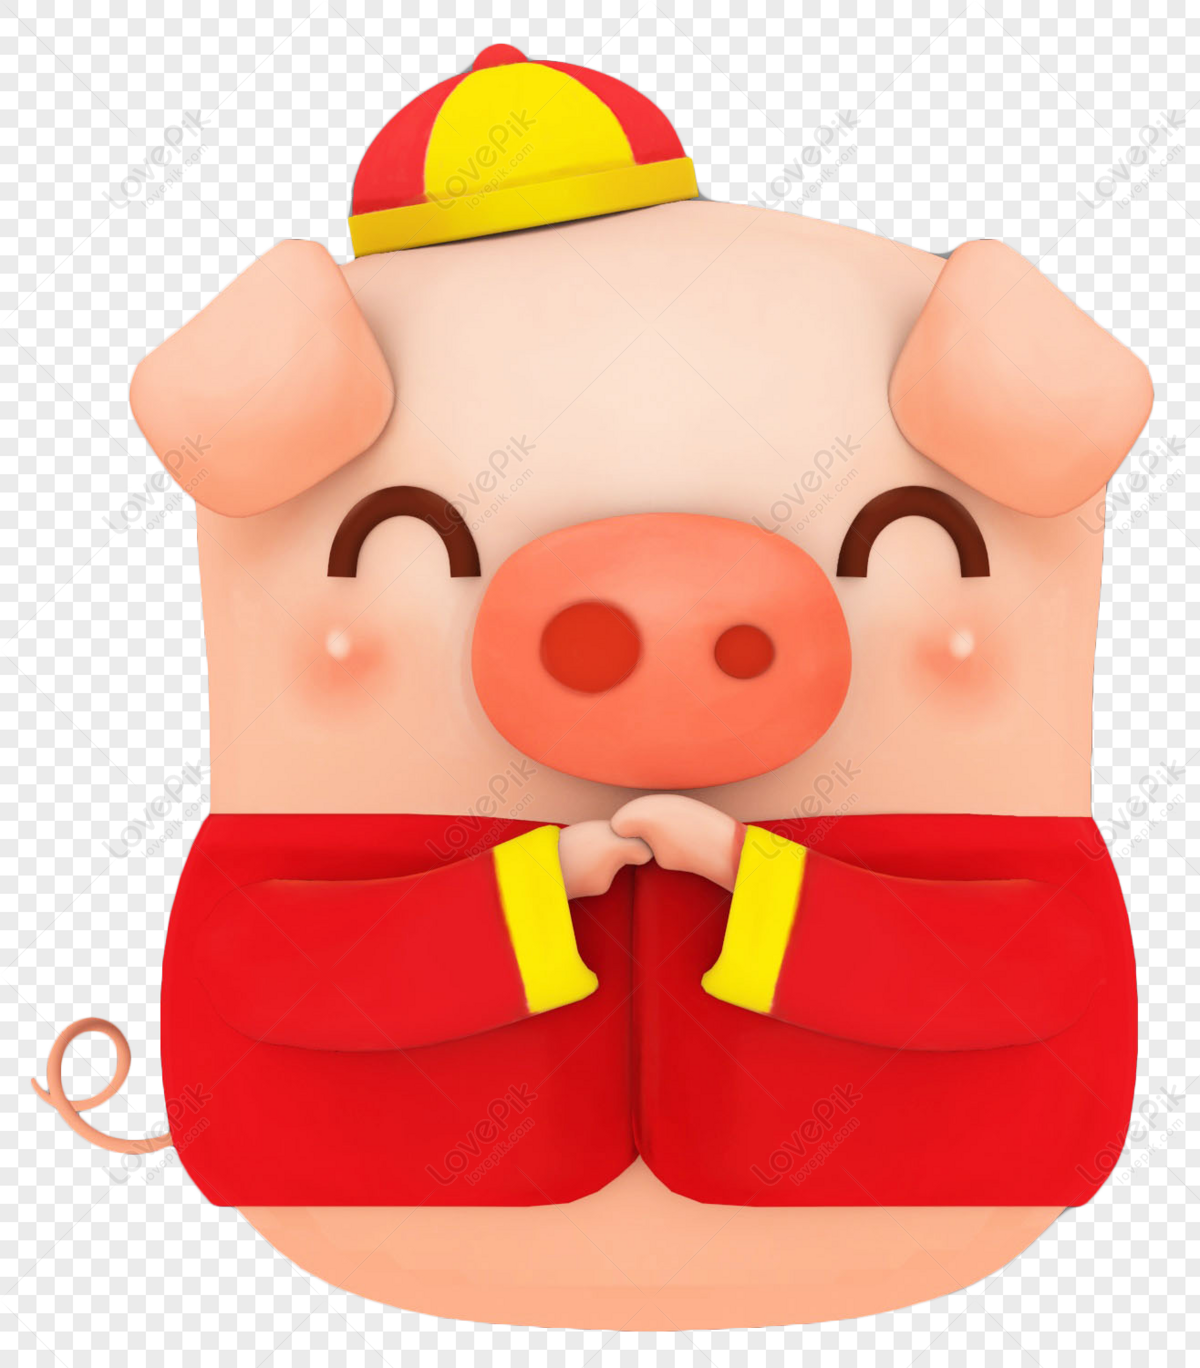 New Year Pig Cartoon Image PNG White Transparent And Clipart Image For Free  Download - Lovepik | 400728722